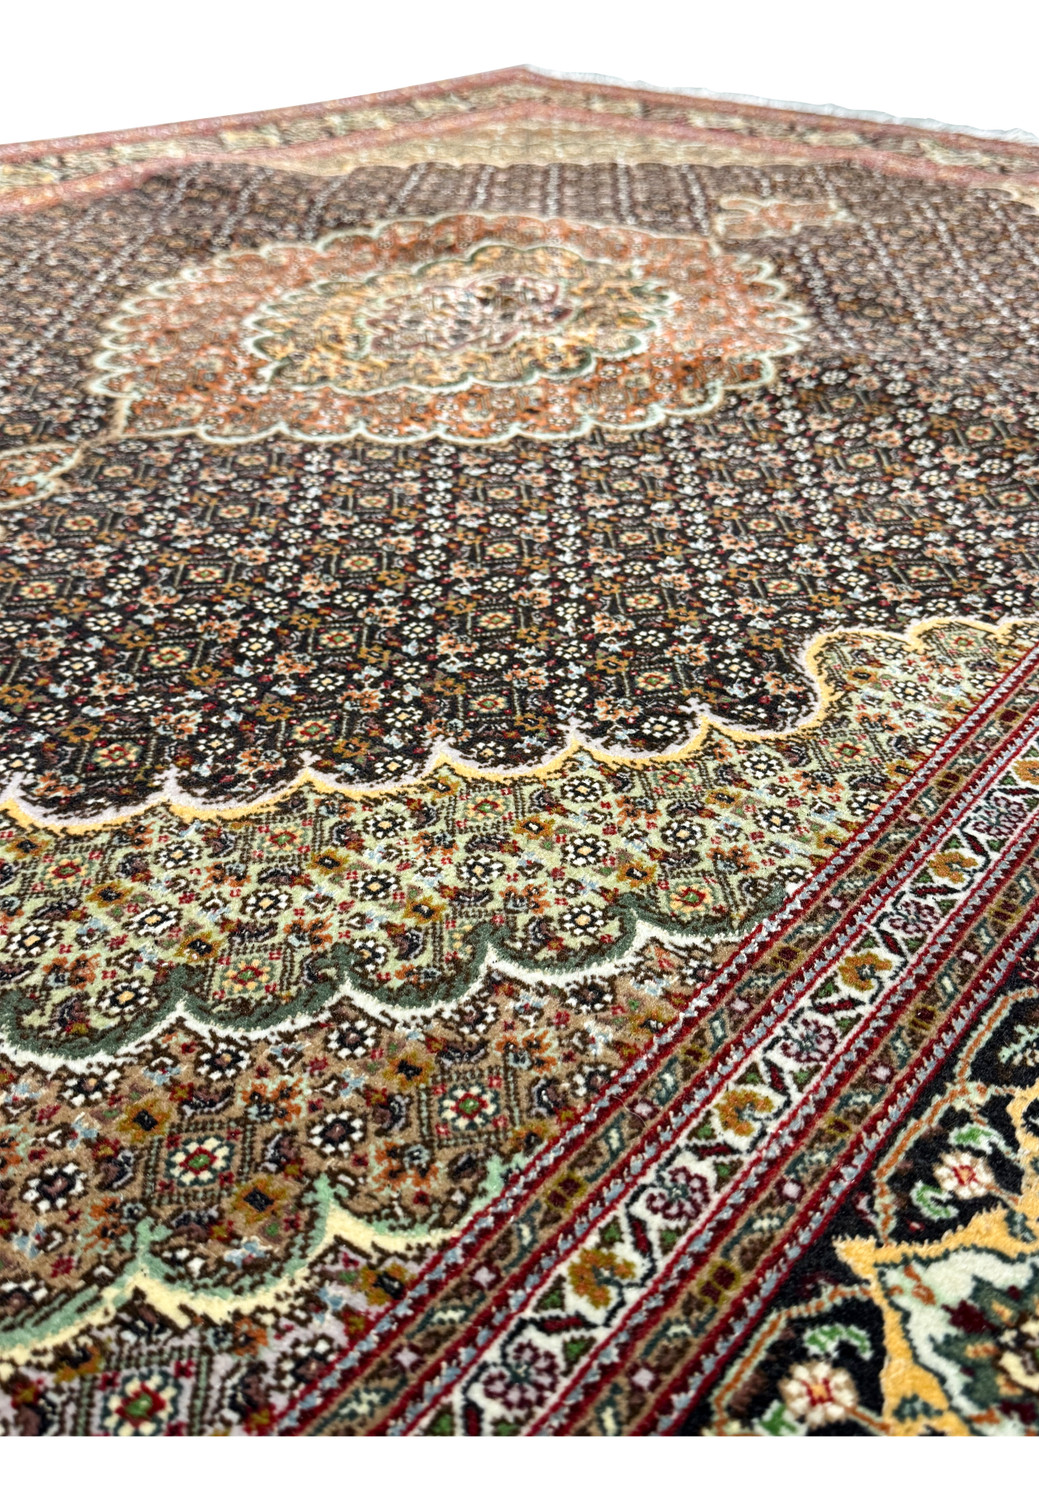 A partial view of the 5x7 Persian Tabriz Mahi 50 Raj Rug focusing on the ornate edge patterns and the textural quality of the weave